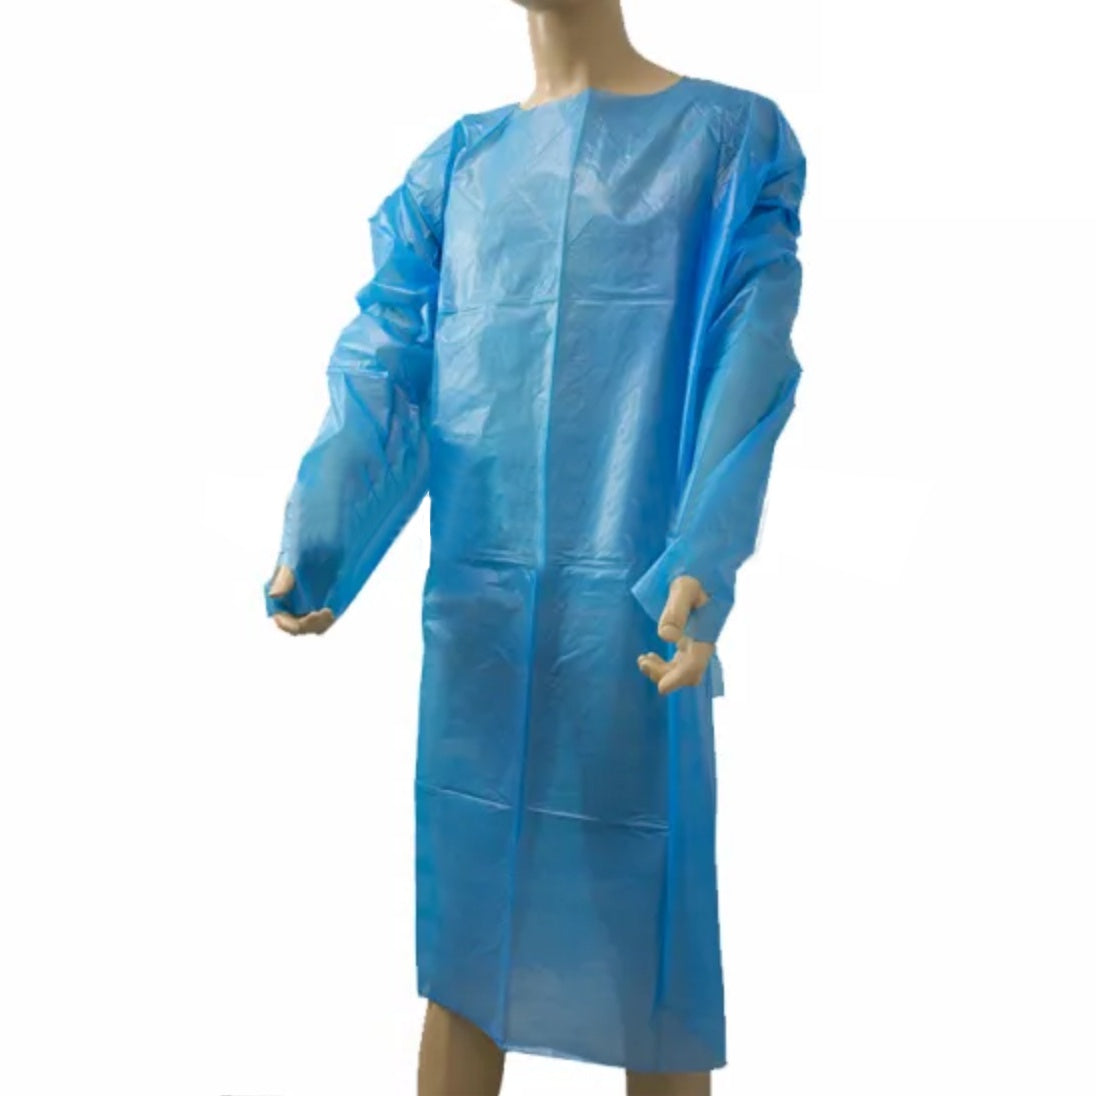 Isolation gown - Non Surgical